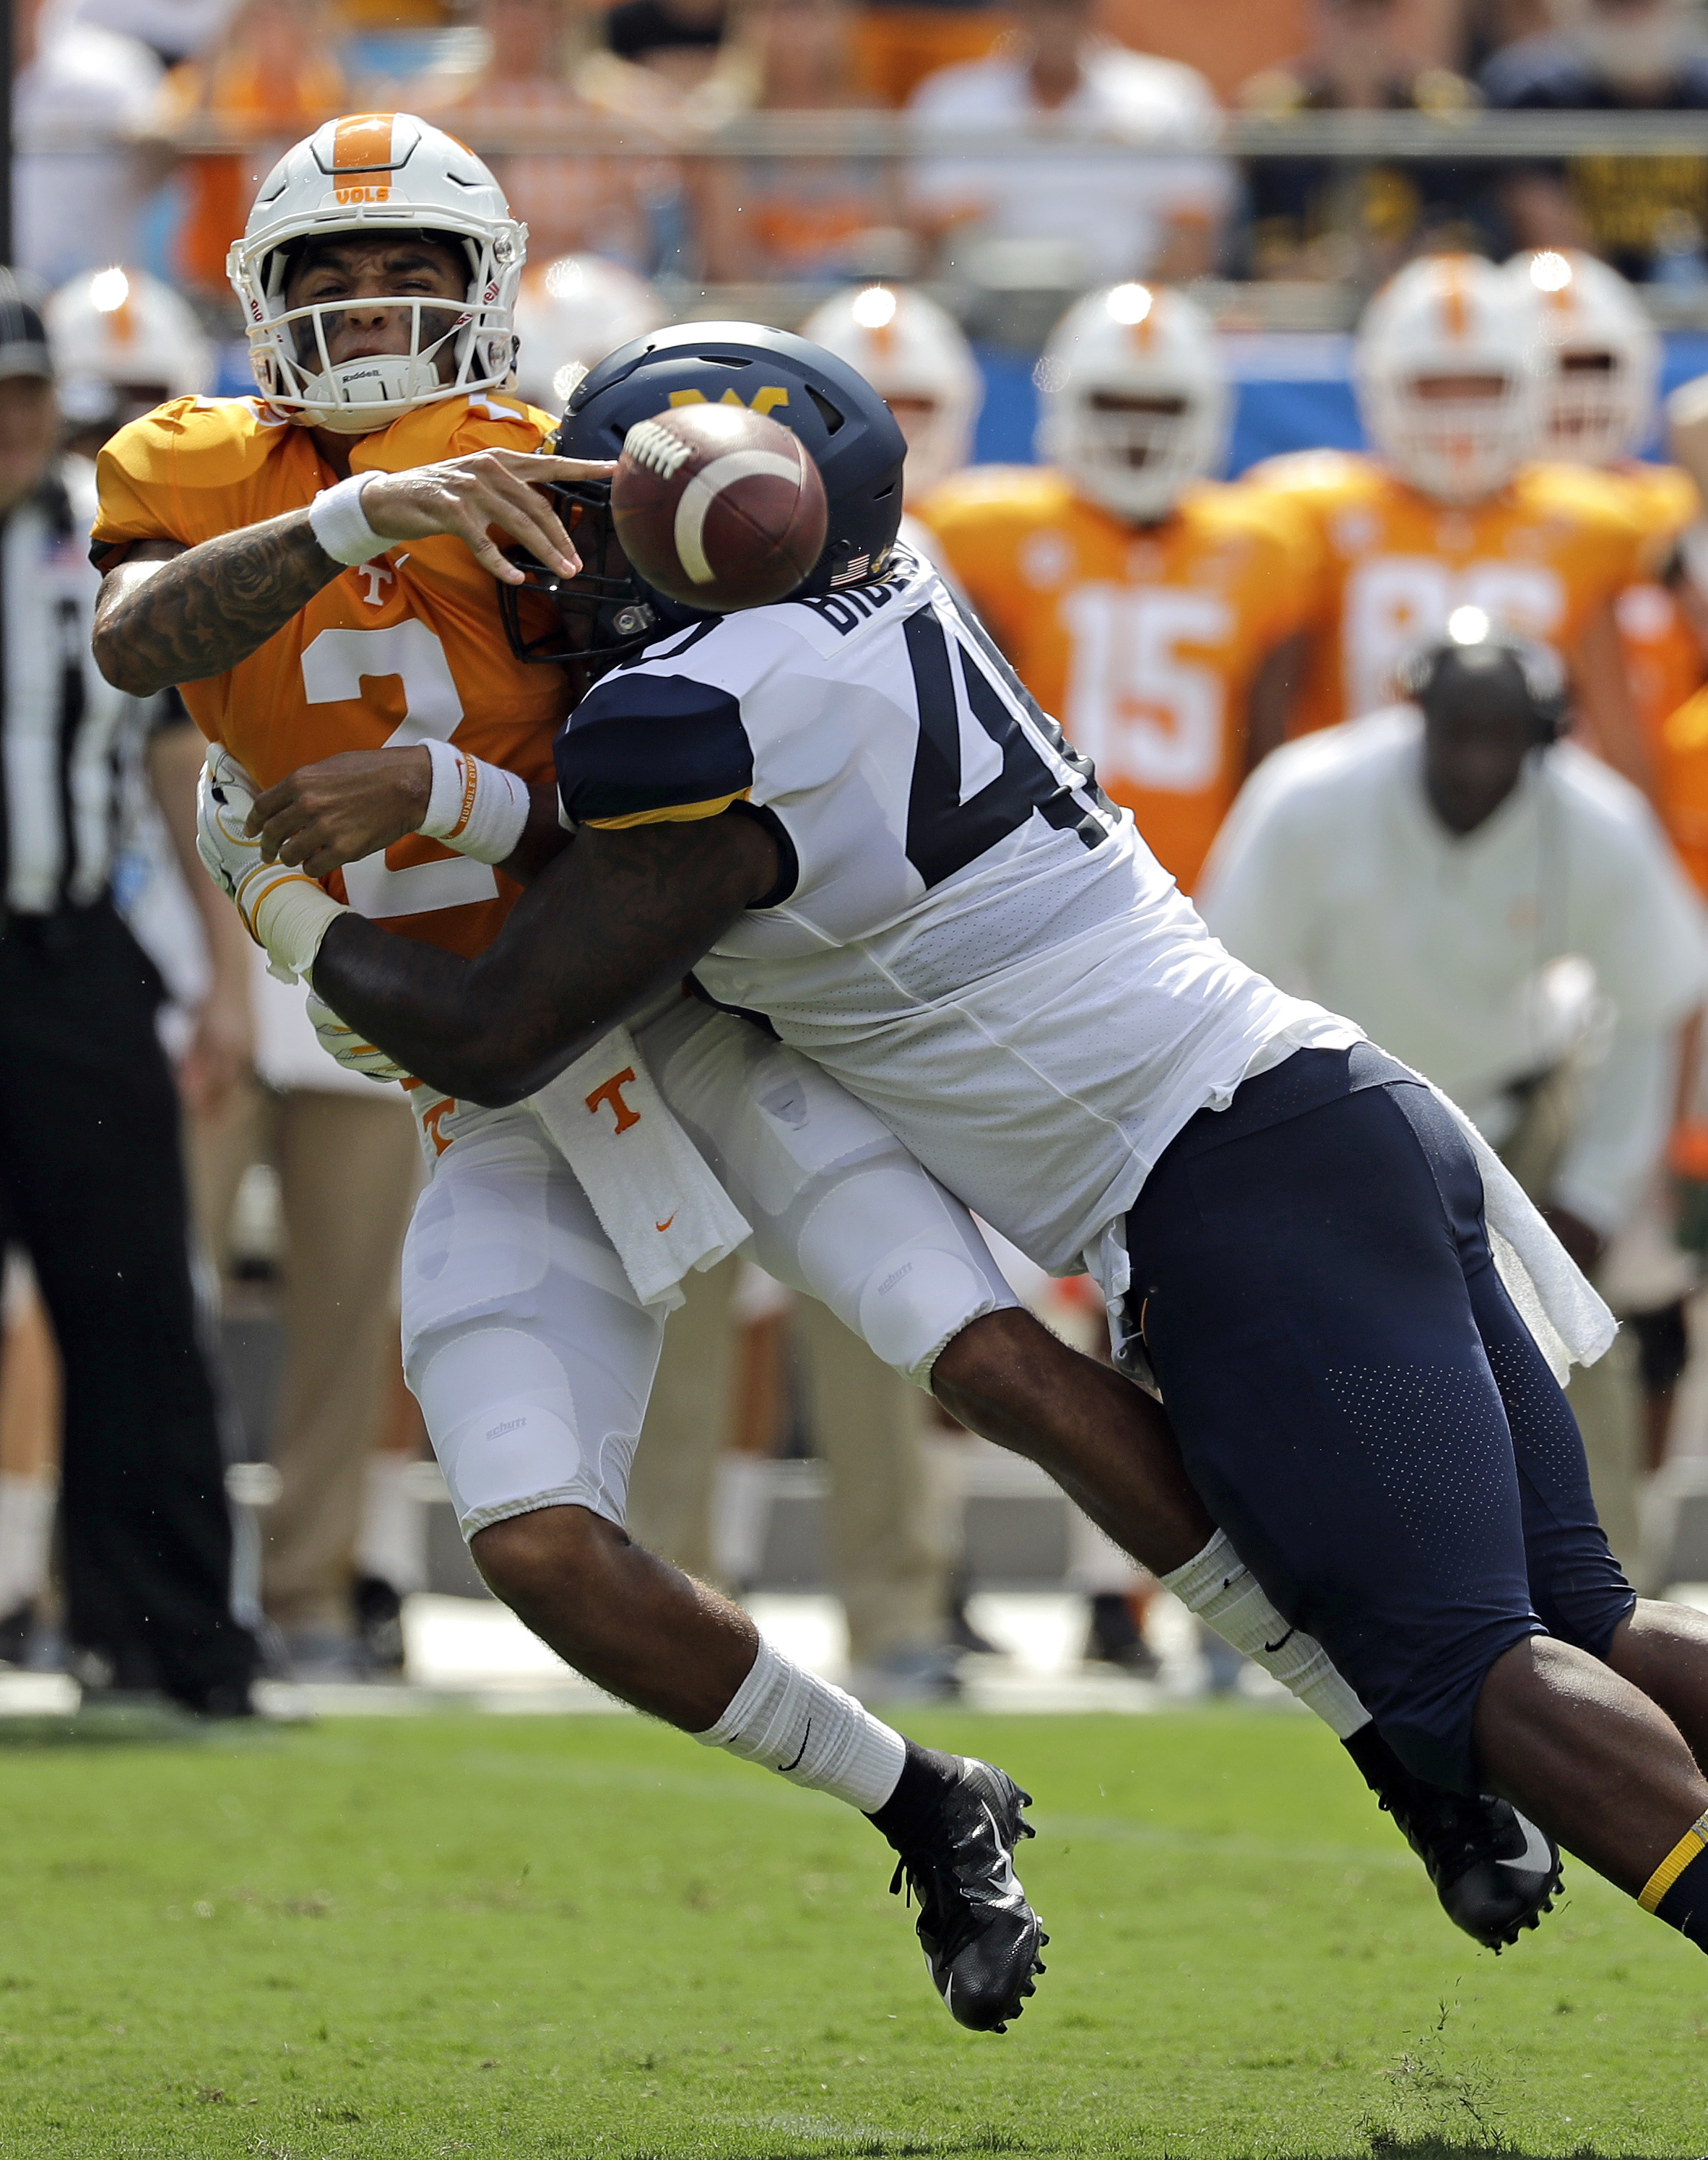 Weather delays 2nd half of Tennessee-West Virginia game